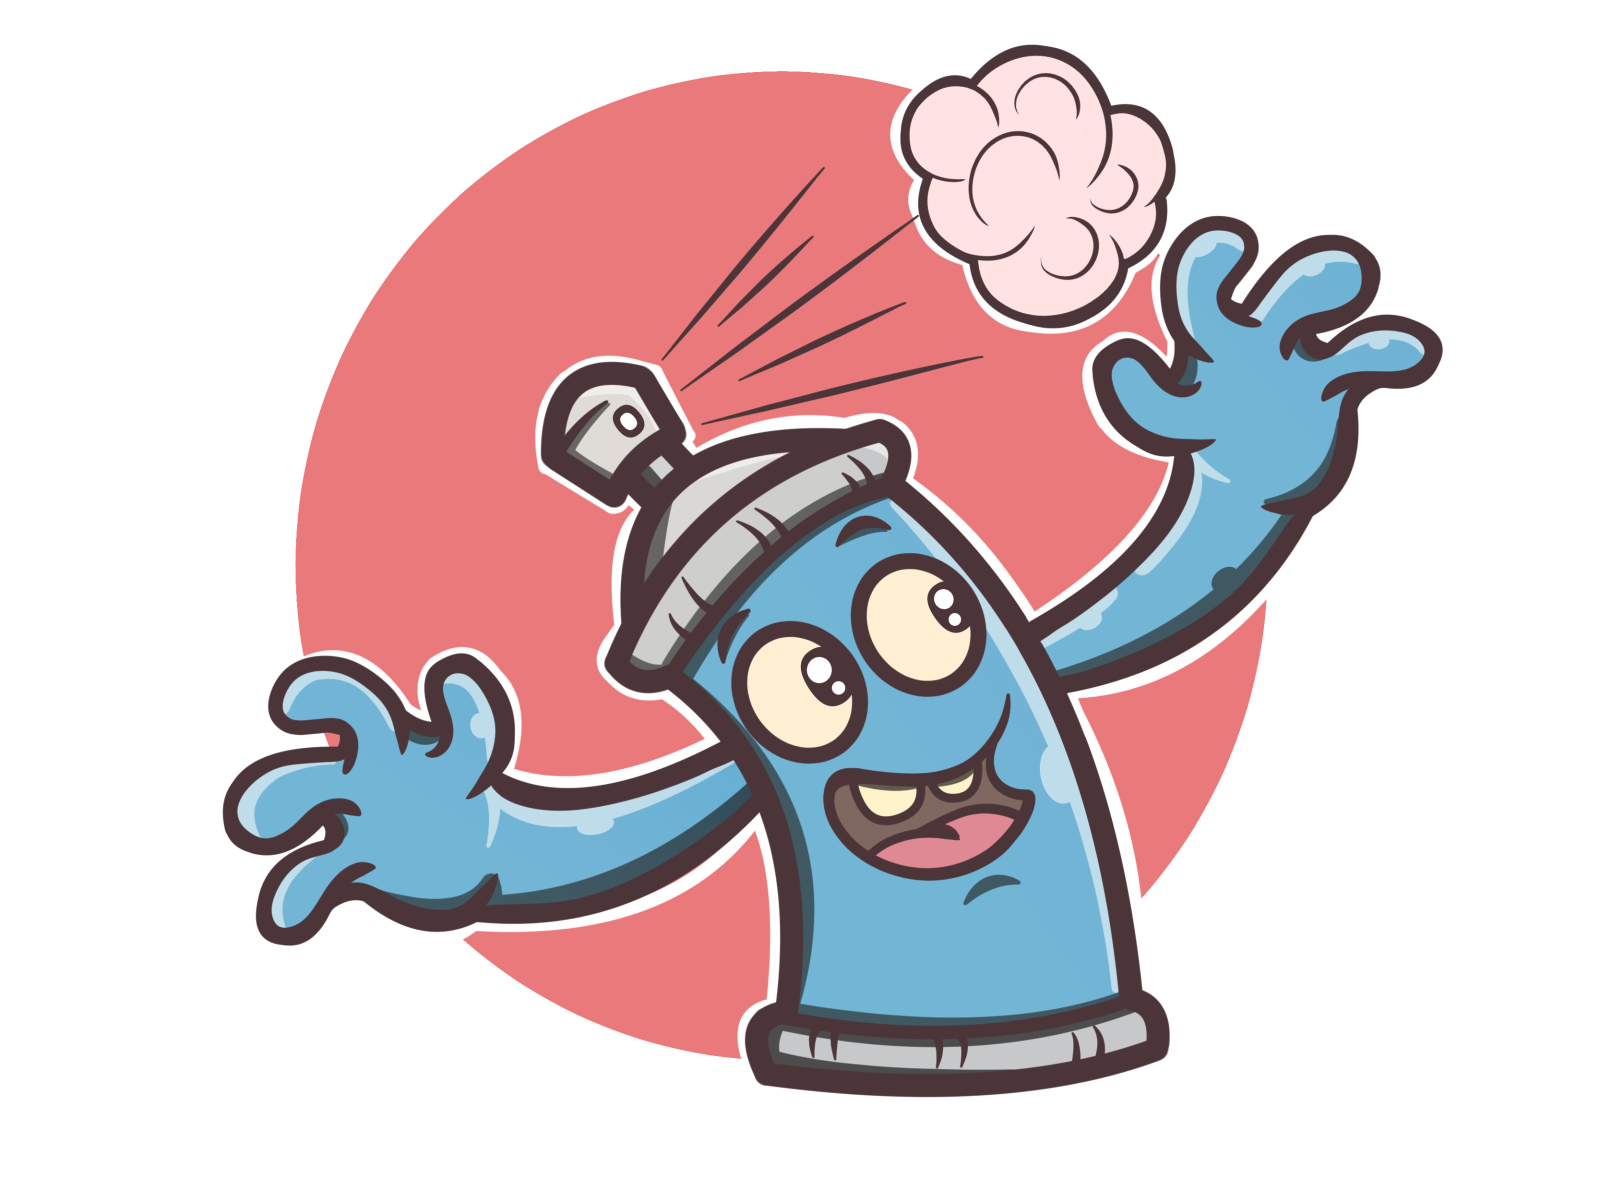 Cantoon by waritoon on Dribbble